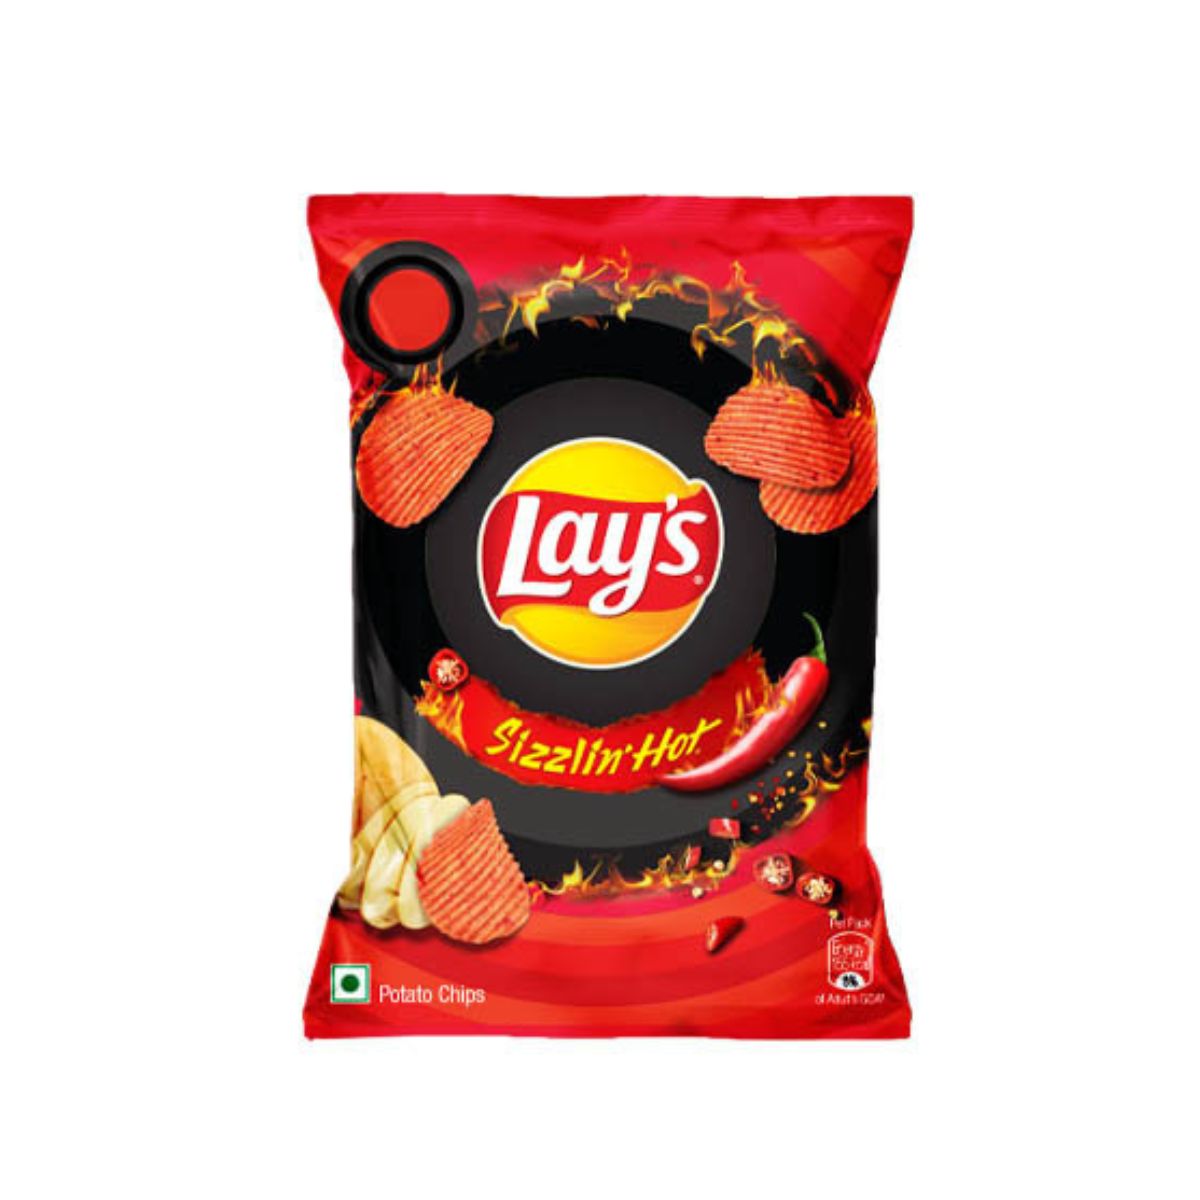 Lay's Sizzlin' Hot Flavour - 48g